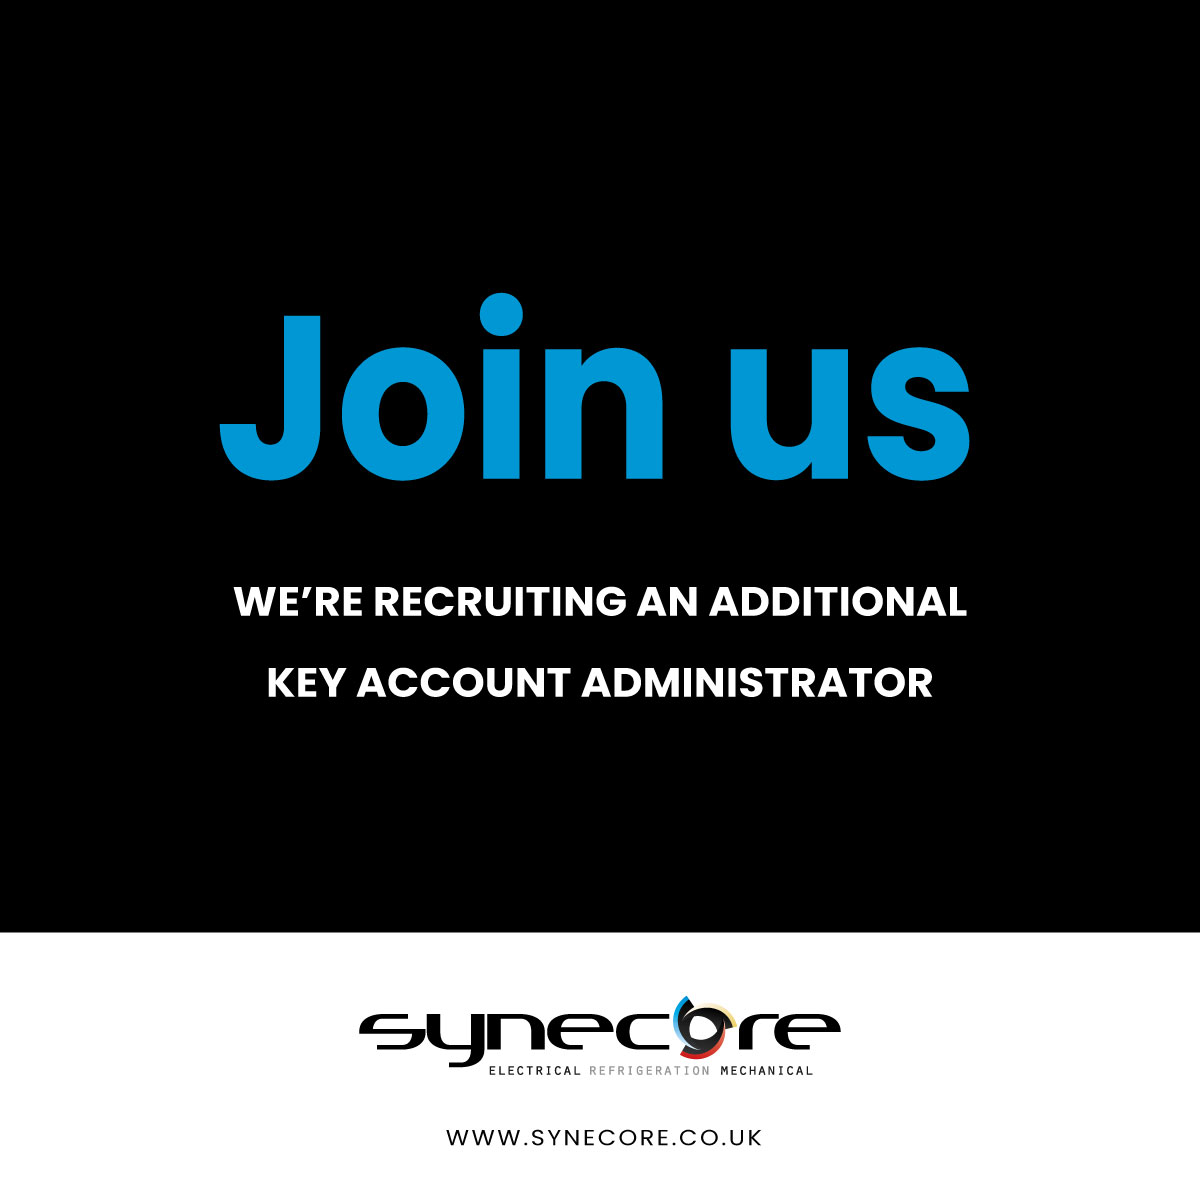 *JOB ALERT: KEY ACCOUNT ADMINISTRATOR*

Duties:
⚫ Quotes
⚫ Ordering parts 
⚫ Updating client portals
⚫ Handling client requests
⚫ Scheduling engineer visits
⚫ Reporting
⚫ Client meetings
⚫ General admin

Send  CV to alison.dracup@synecore.co.uk.

#jobsinkent #medway #job